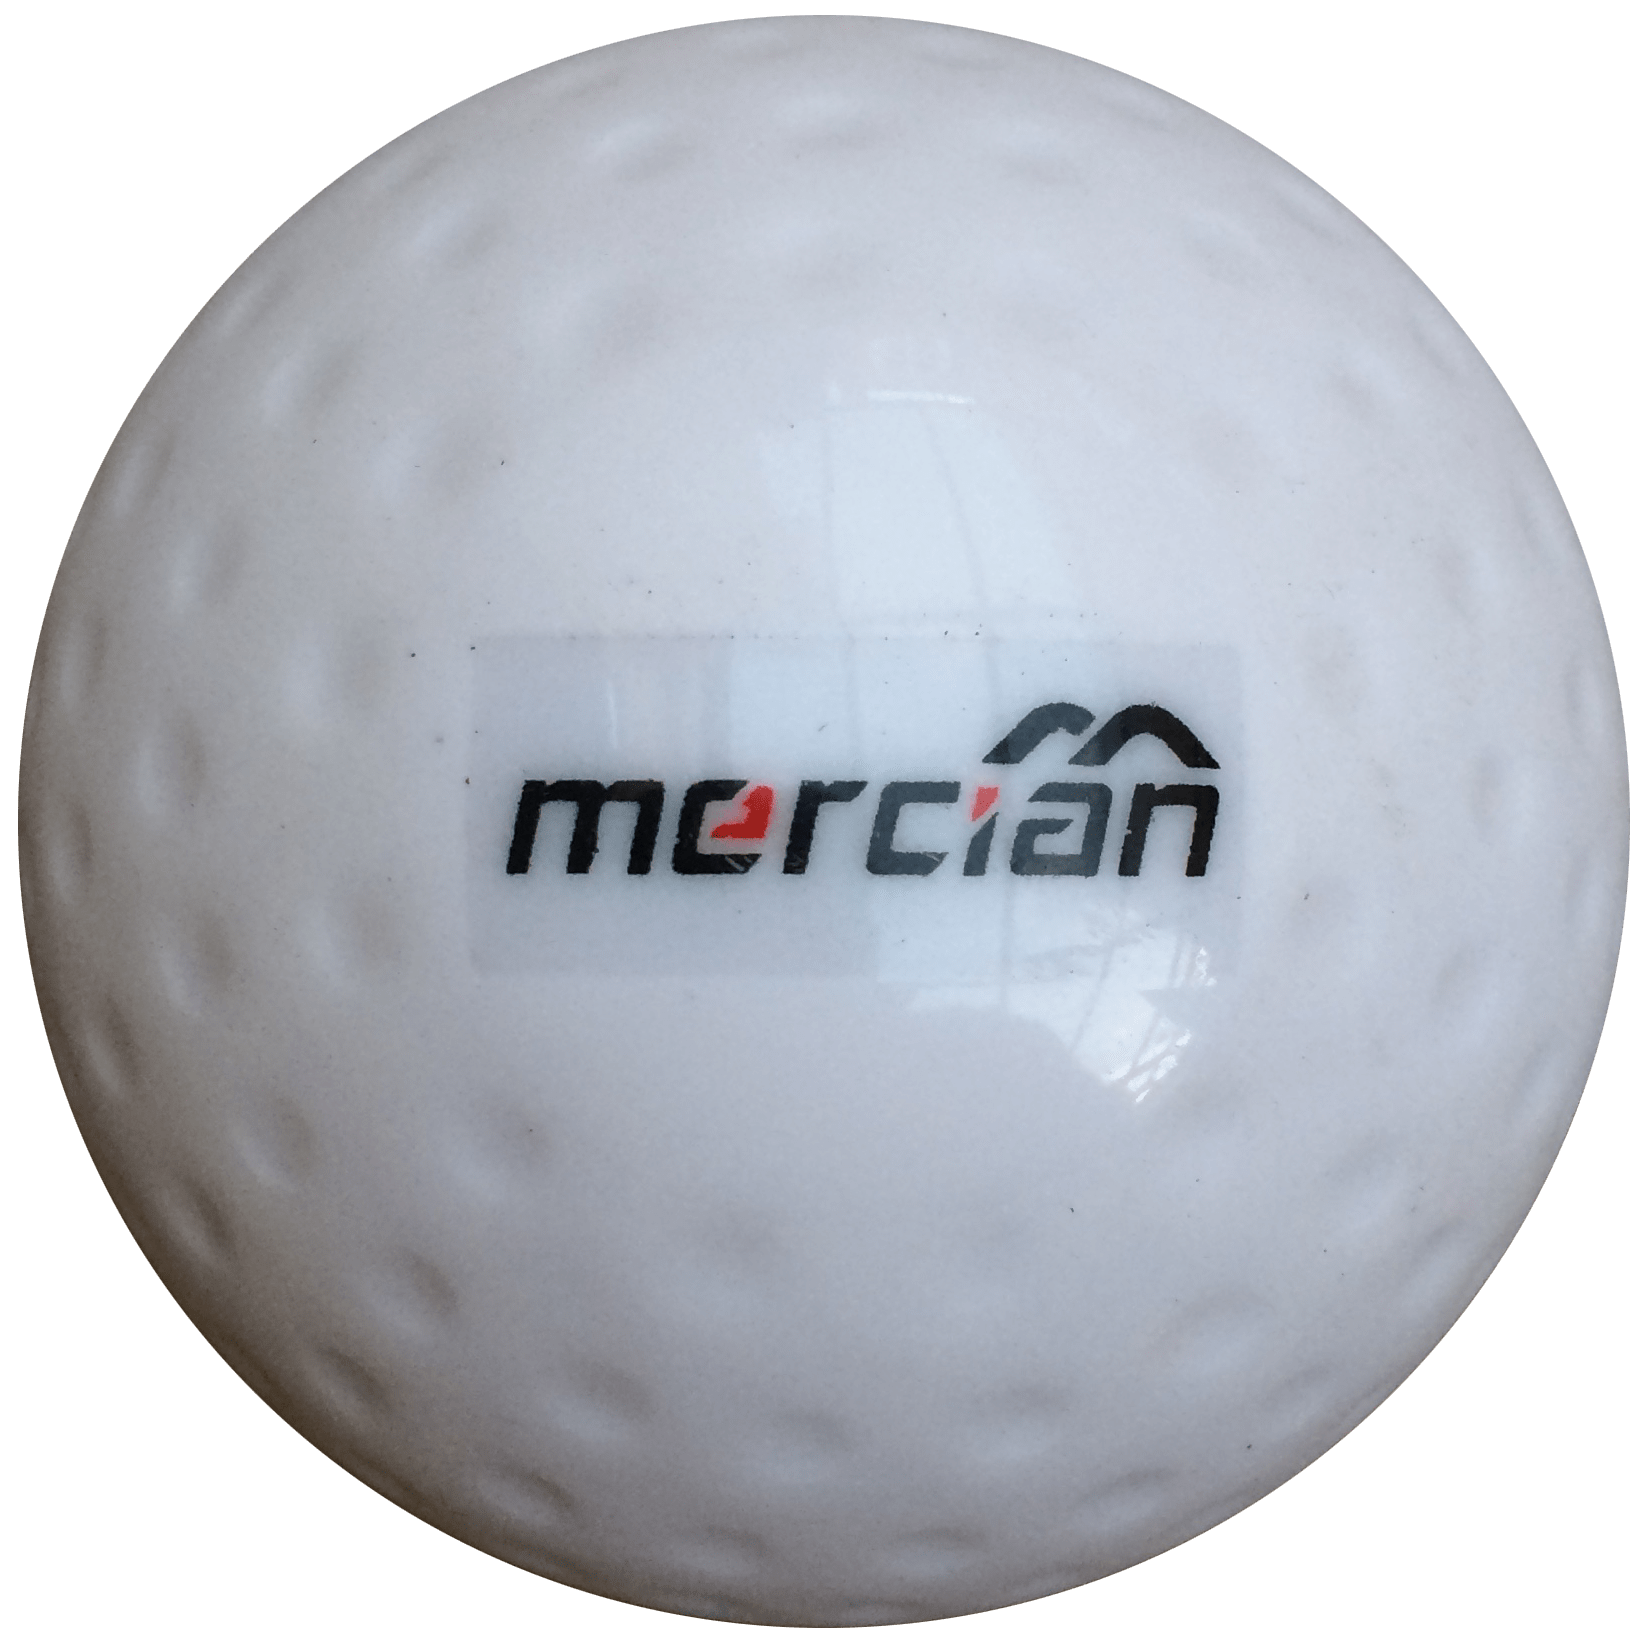 Mercian Match Dimple | The Hockey Centre